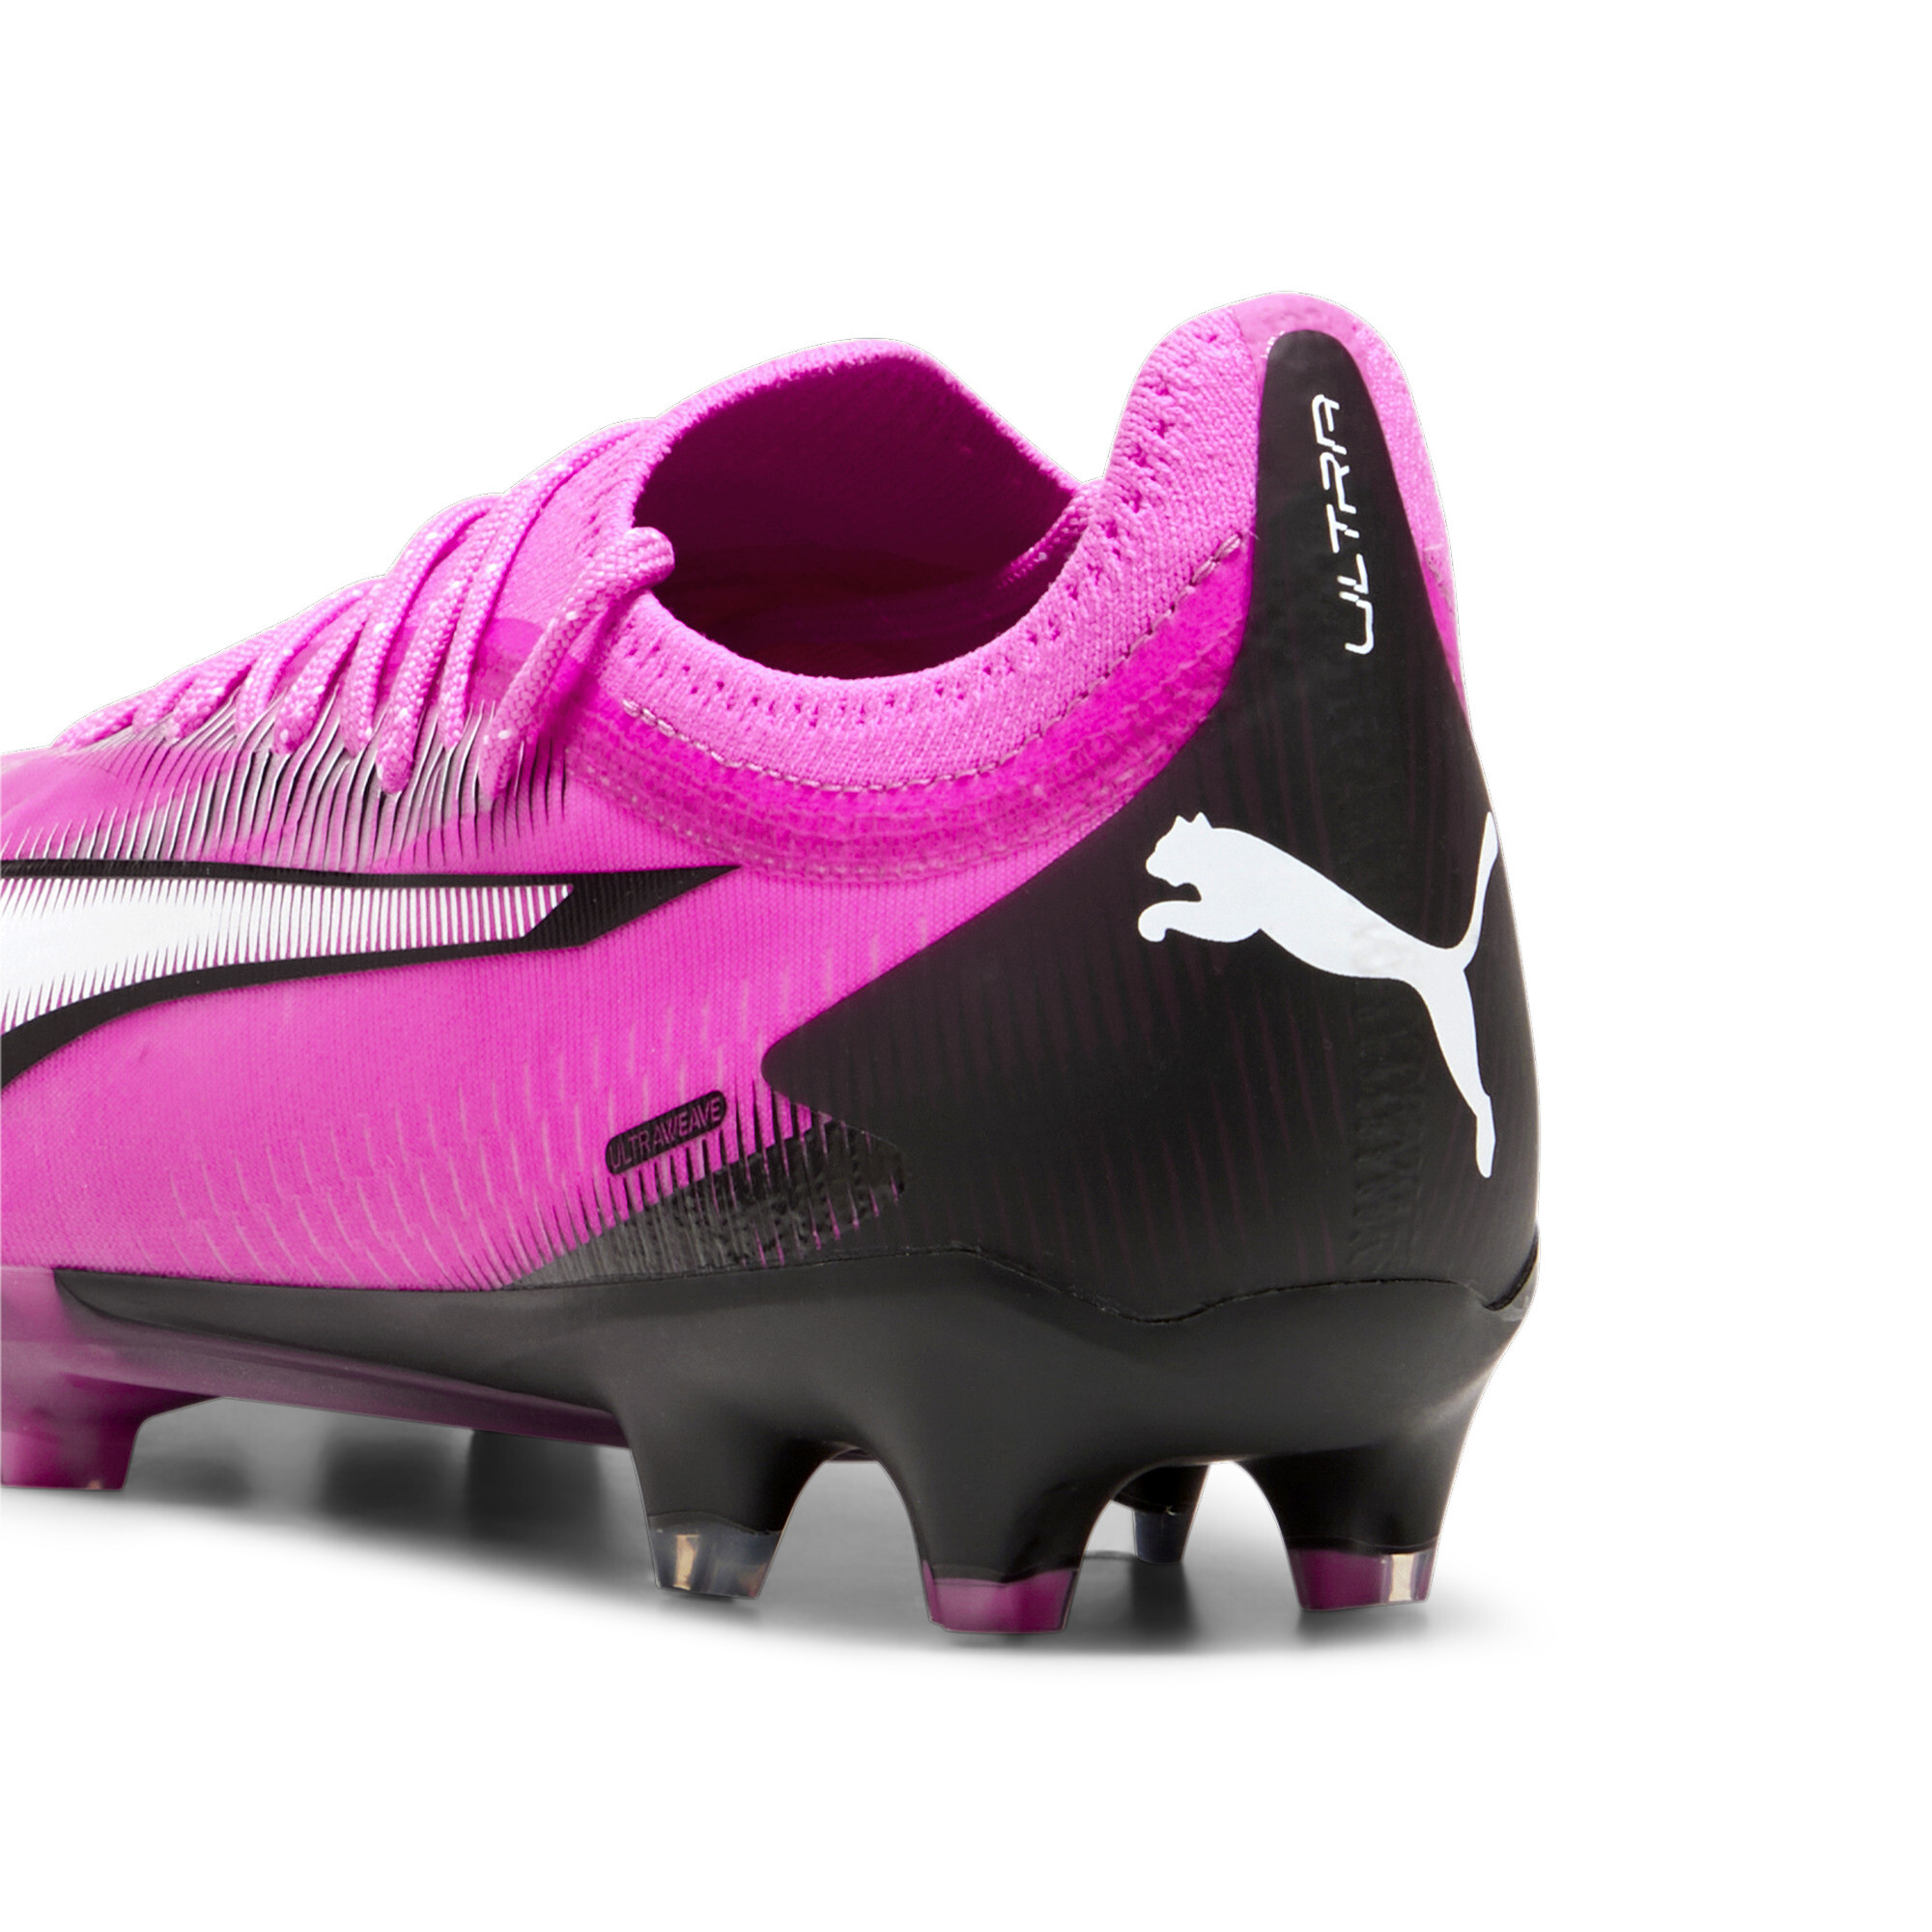 Puma ULTRA ULTIMATE FG/AG Football Boots, Pink, Size 37.5, Shoes